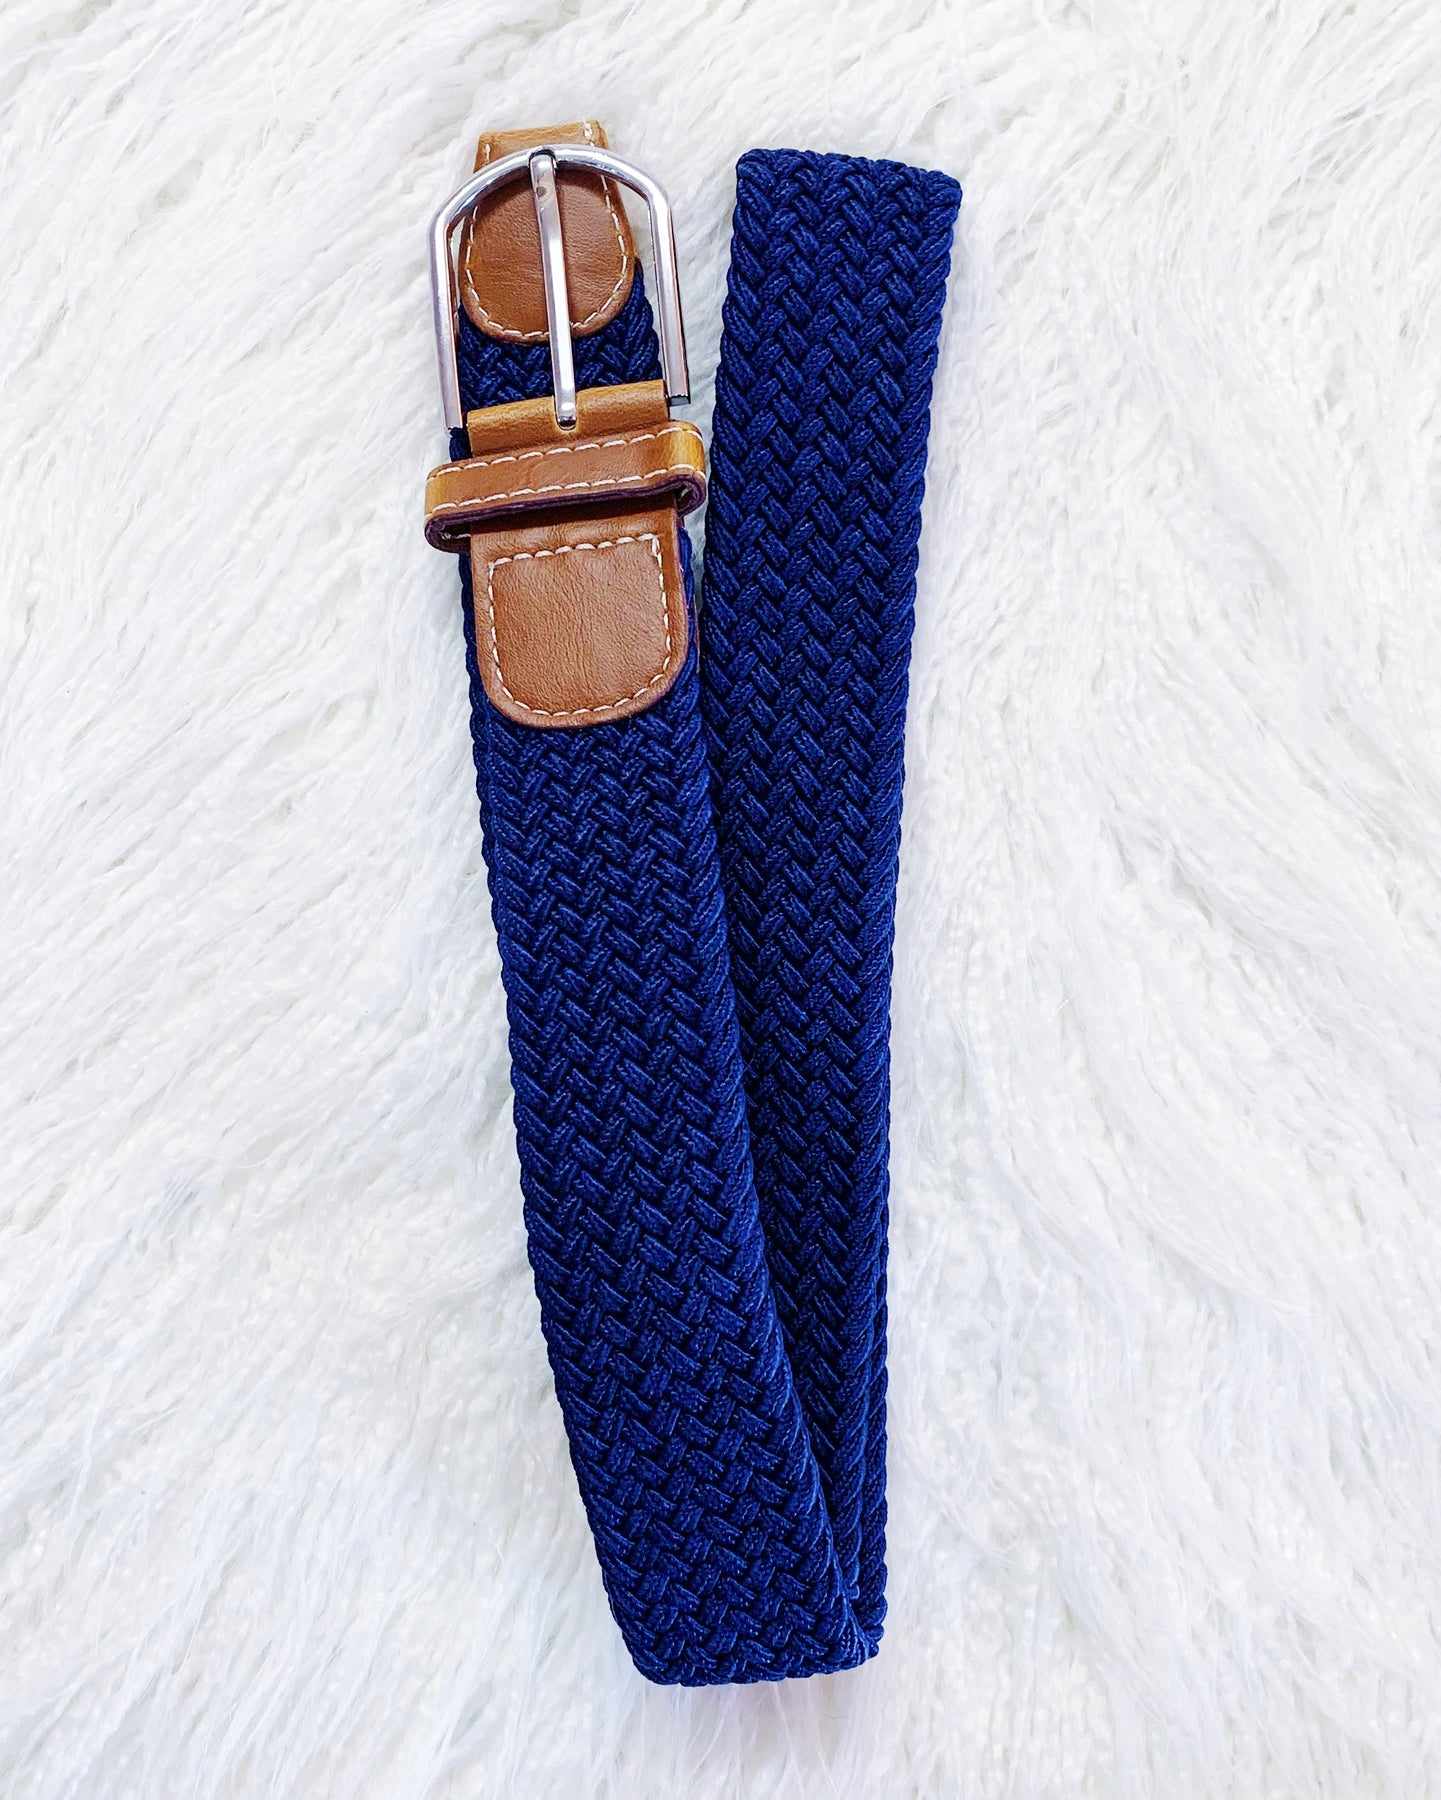 - Belts Stretch Urban Horsewear Riders For